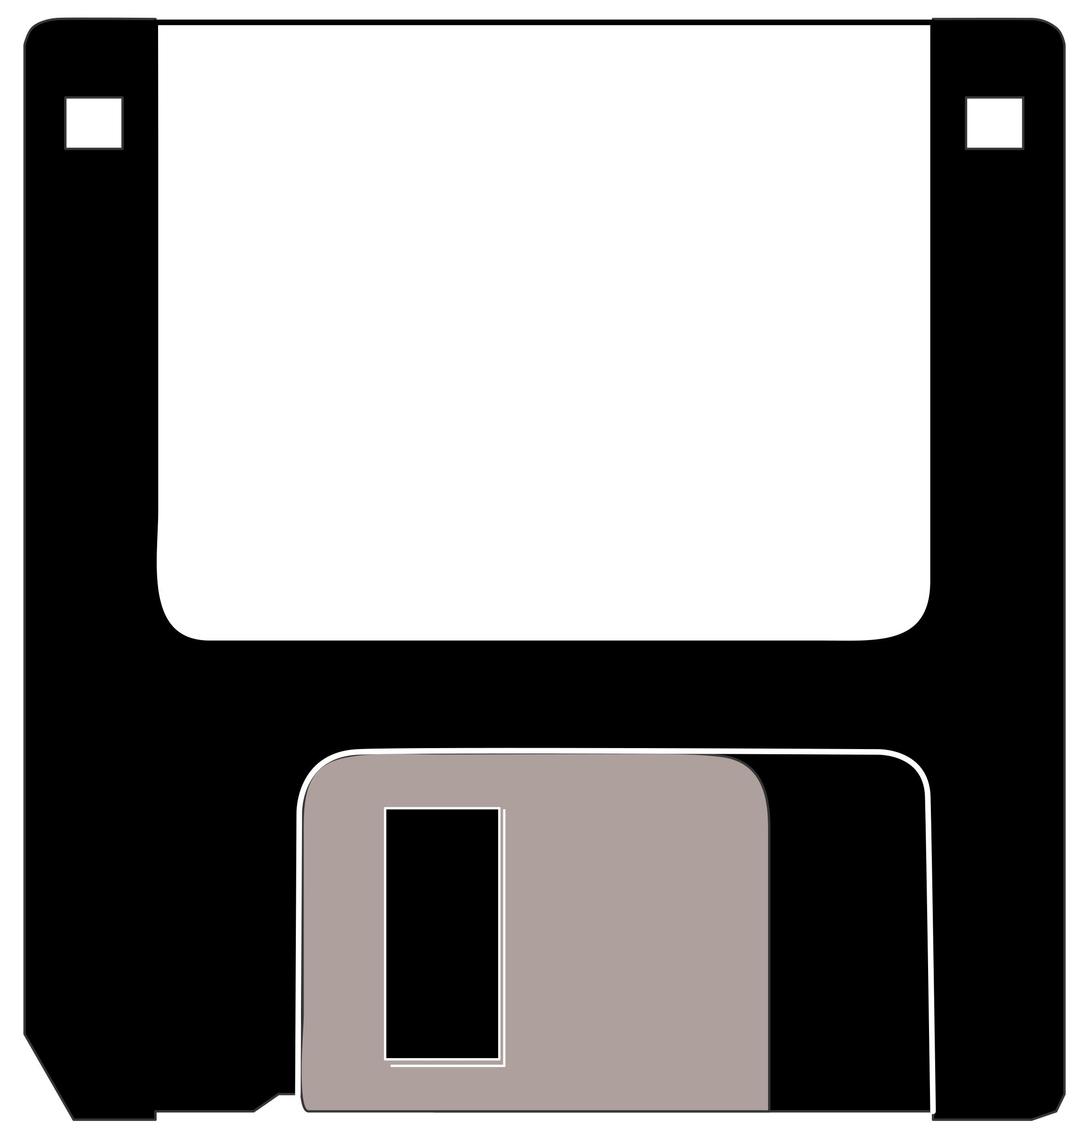 old three and a half diskette png transparent